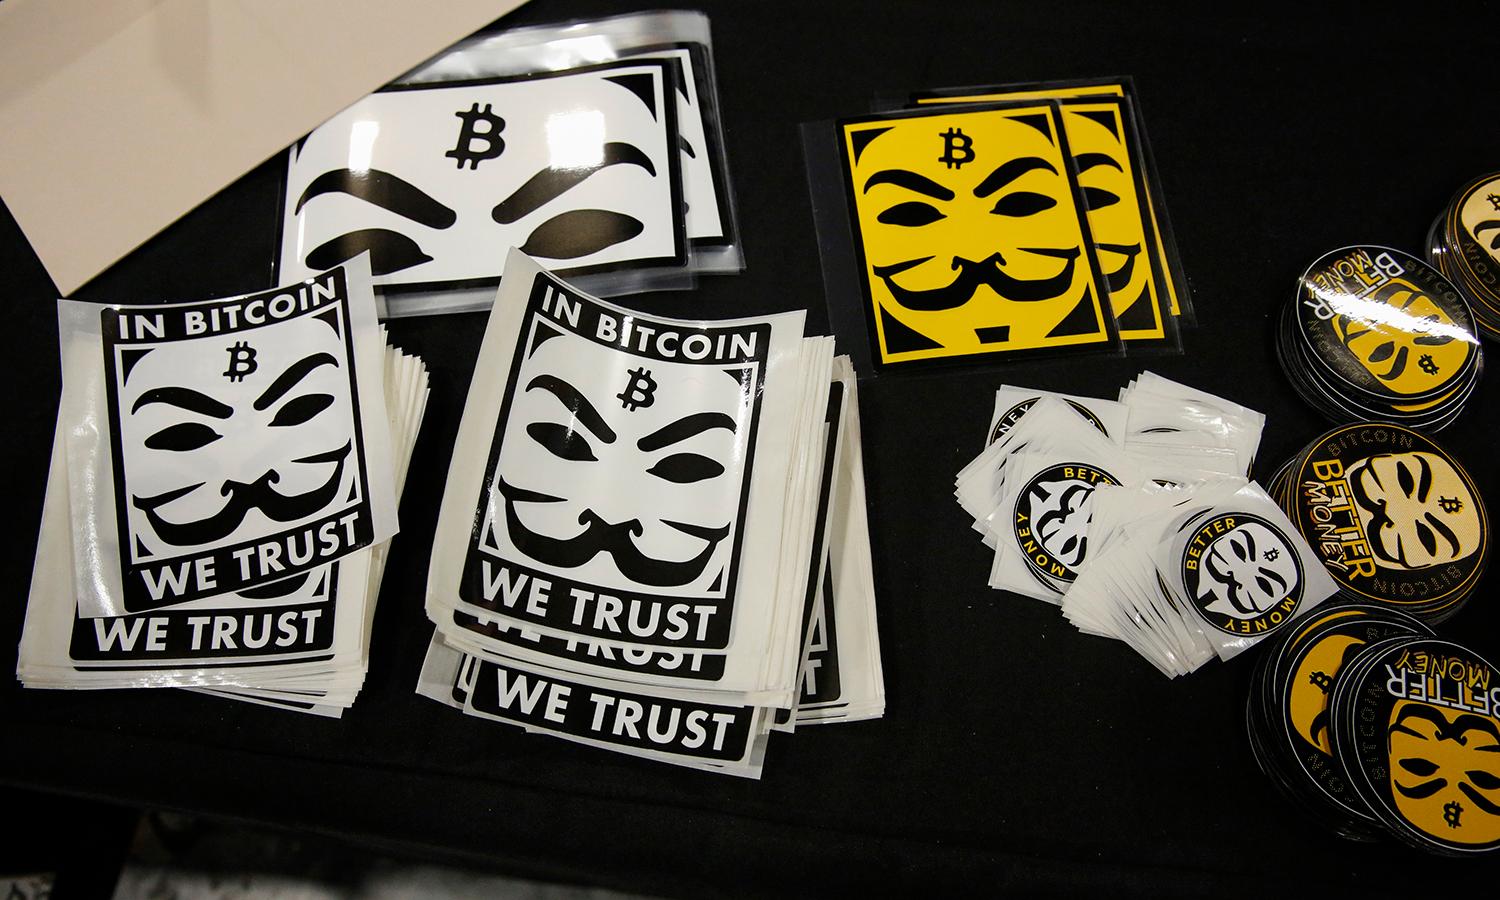 Stickers depicting Guy Fawkes masks (Anonymous mask) and the bitcoin logo